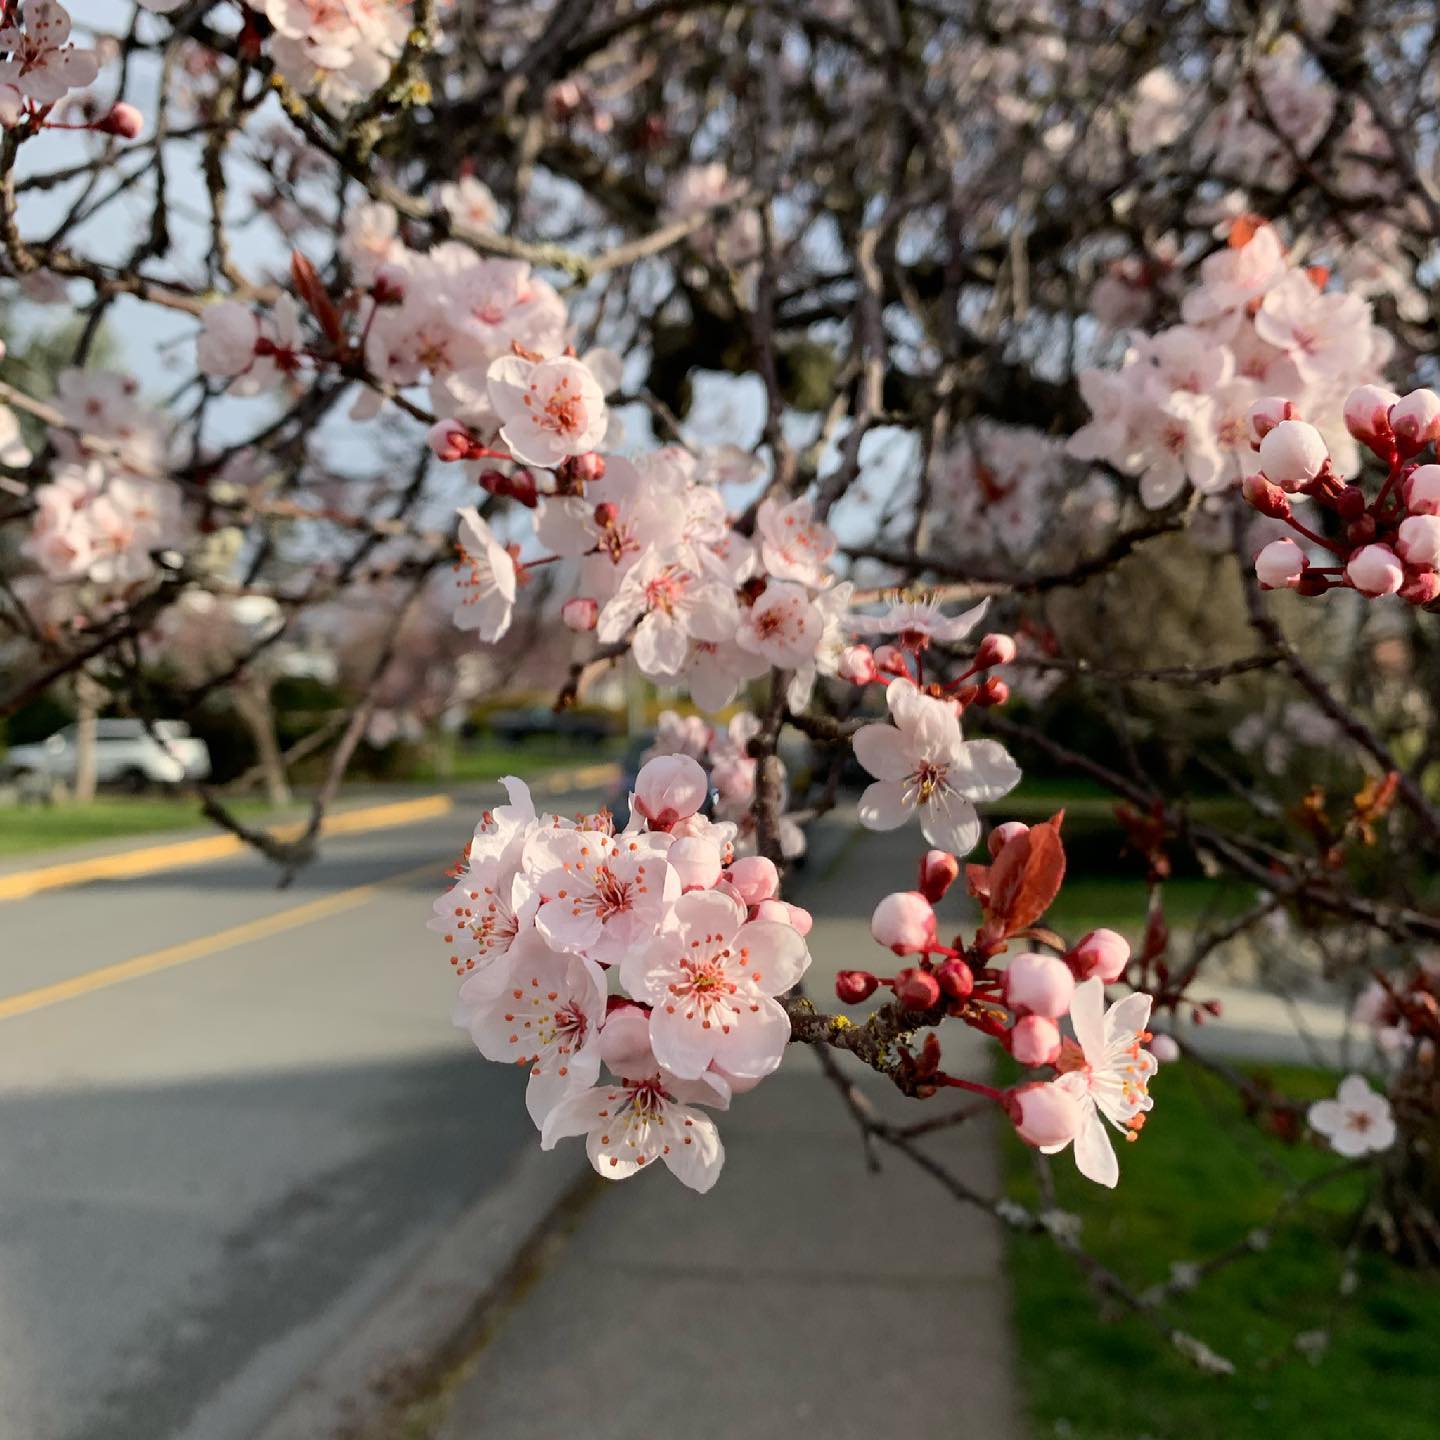 Signs of spring are starting to pop out. #yyj #spring #cherryblossoms